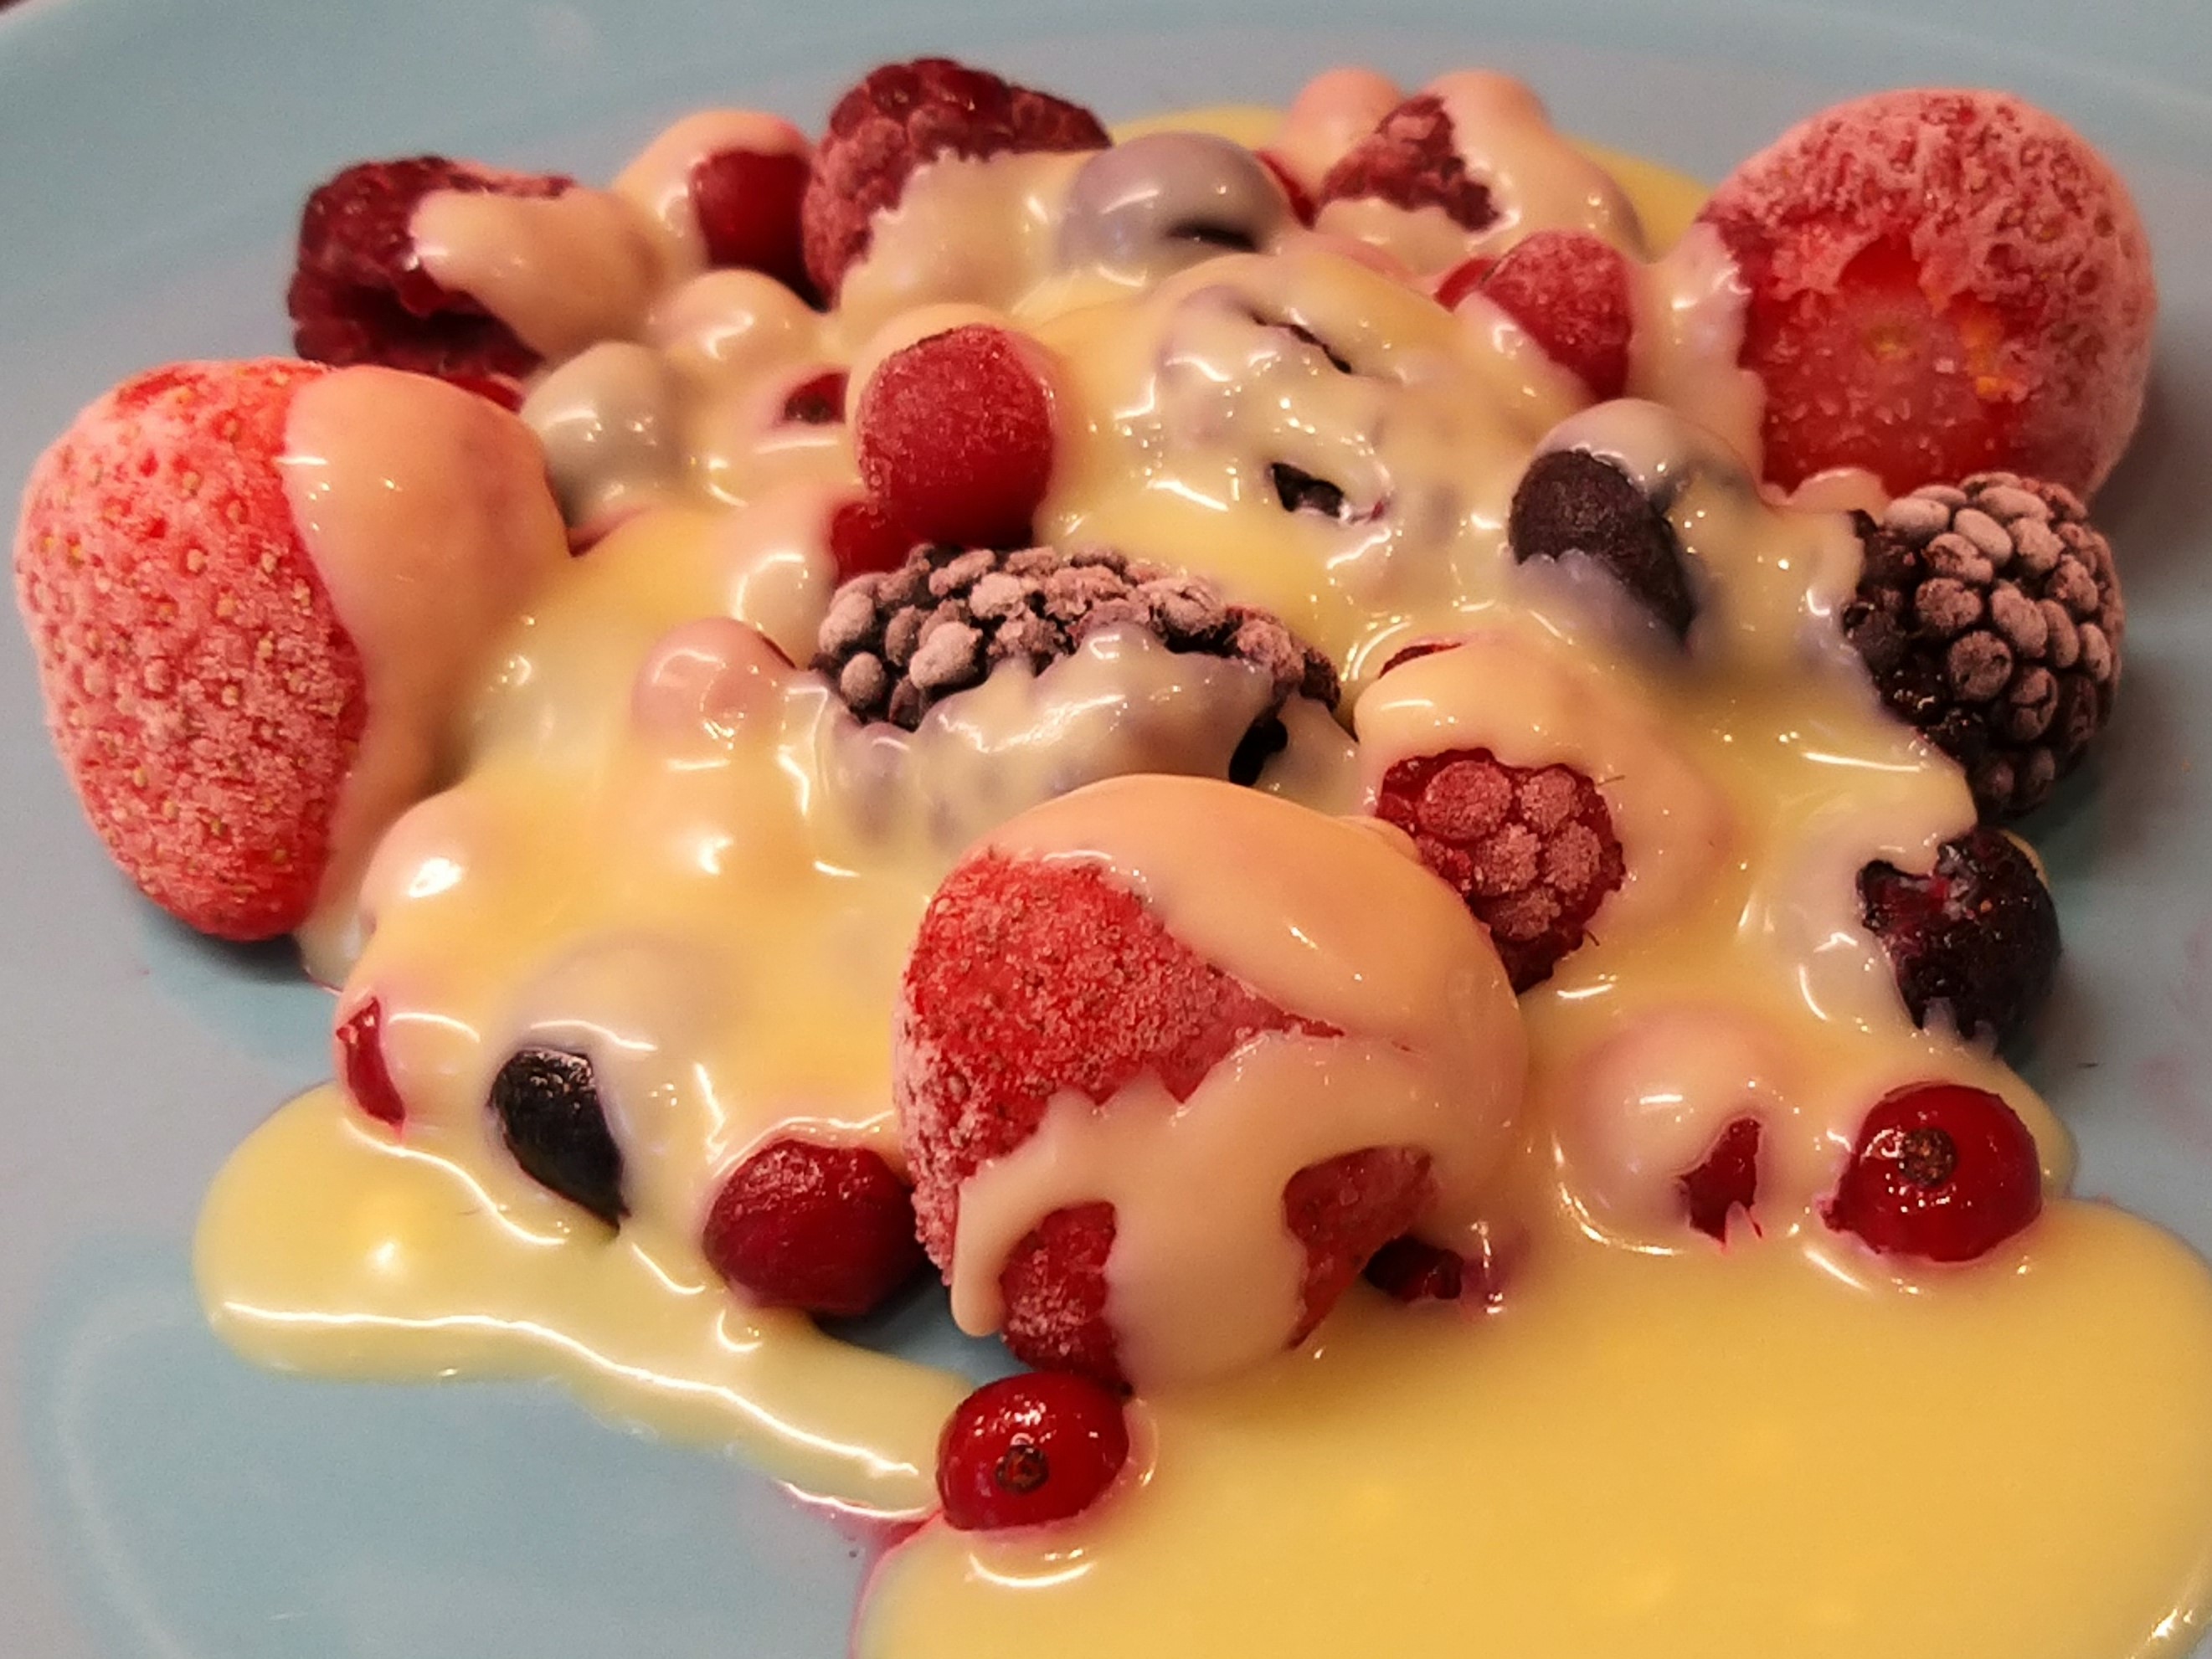 Frozen berries with a white chocolate sauce